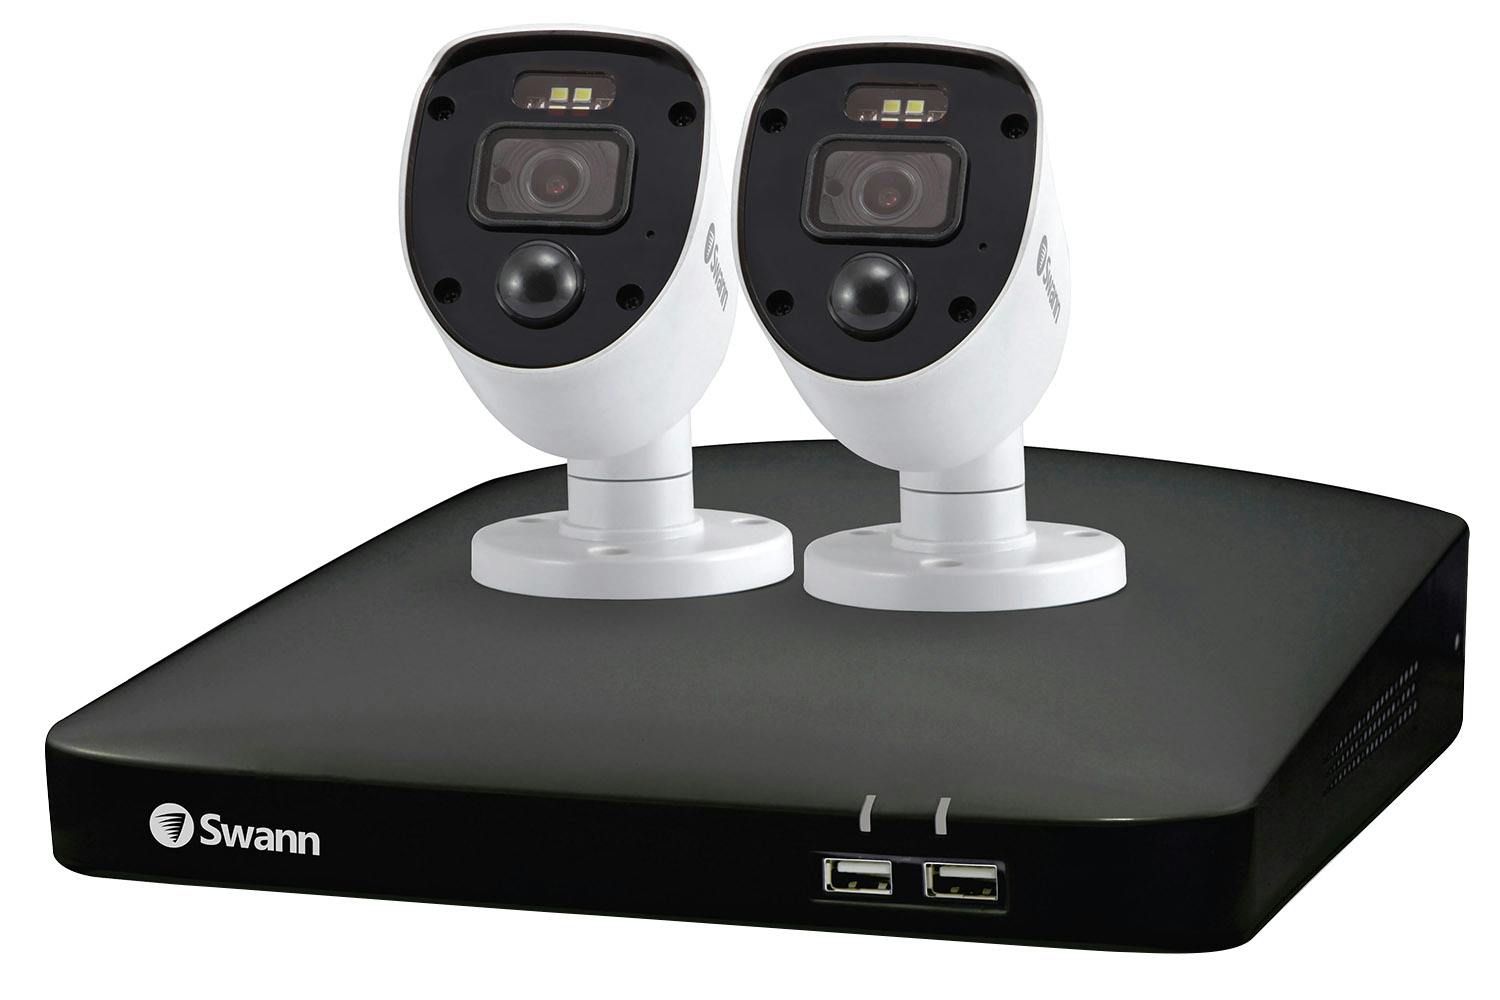 Do Swann cameras have a monthly fee?